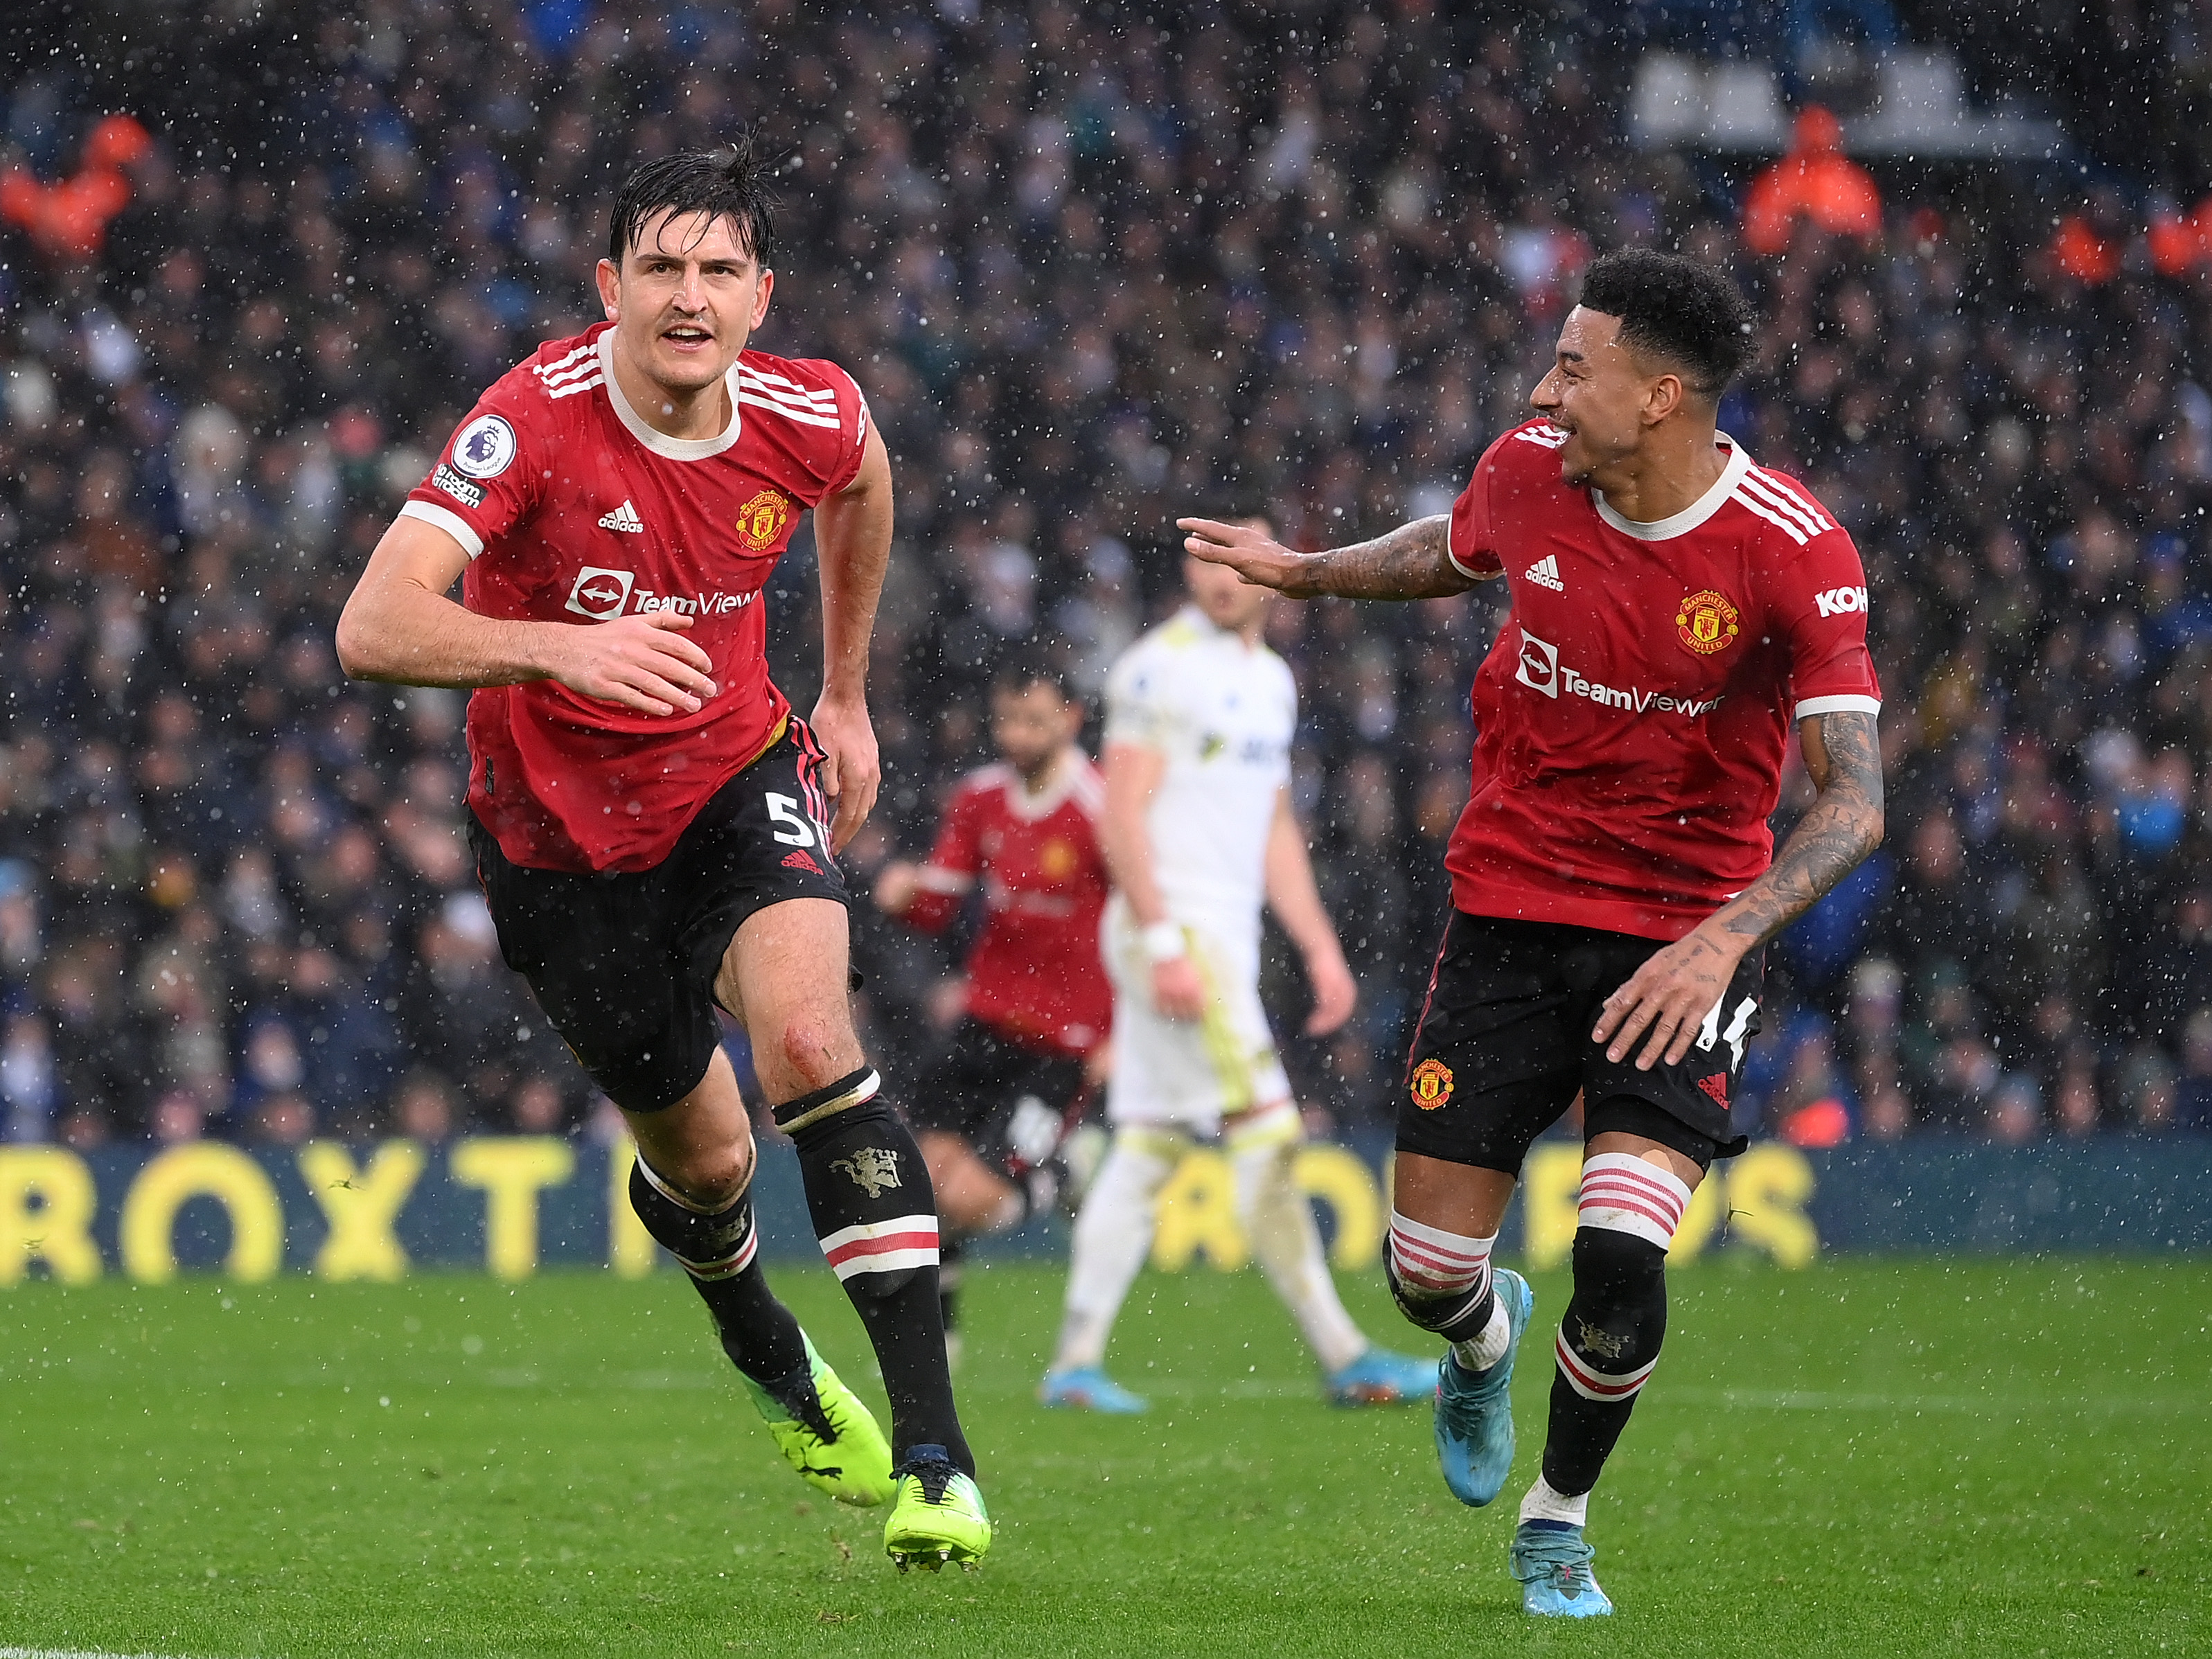 Leeds 2-4 Manchester United LIVE: Manchester United do the double over Leeds in an end to end thrilling game; Sancho and Fernandes were the star-men